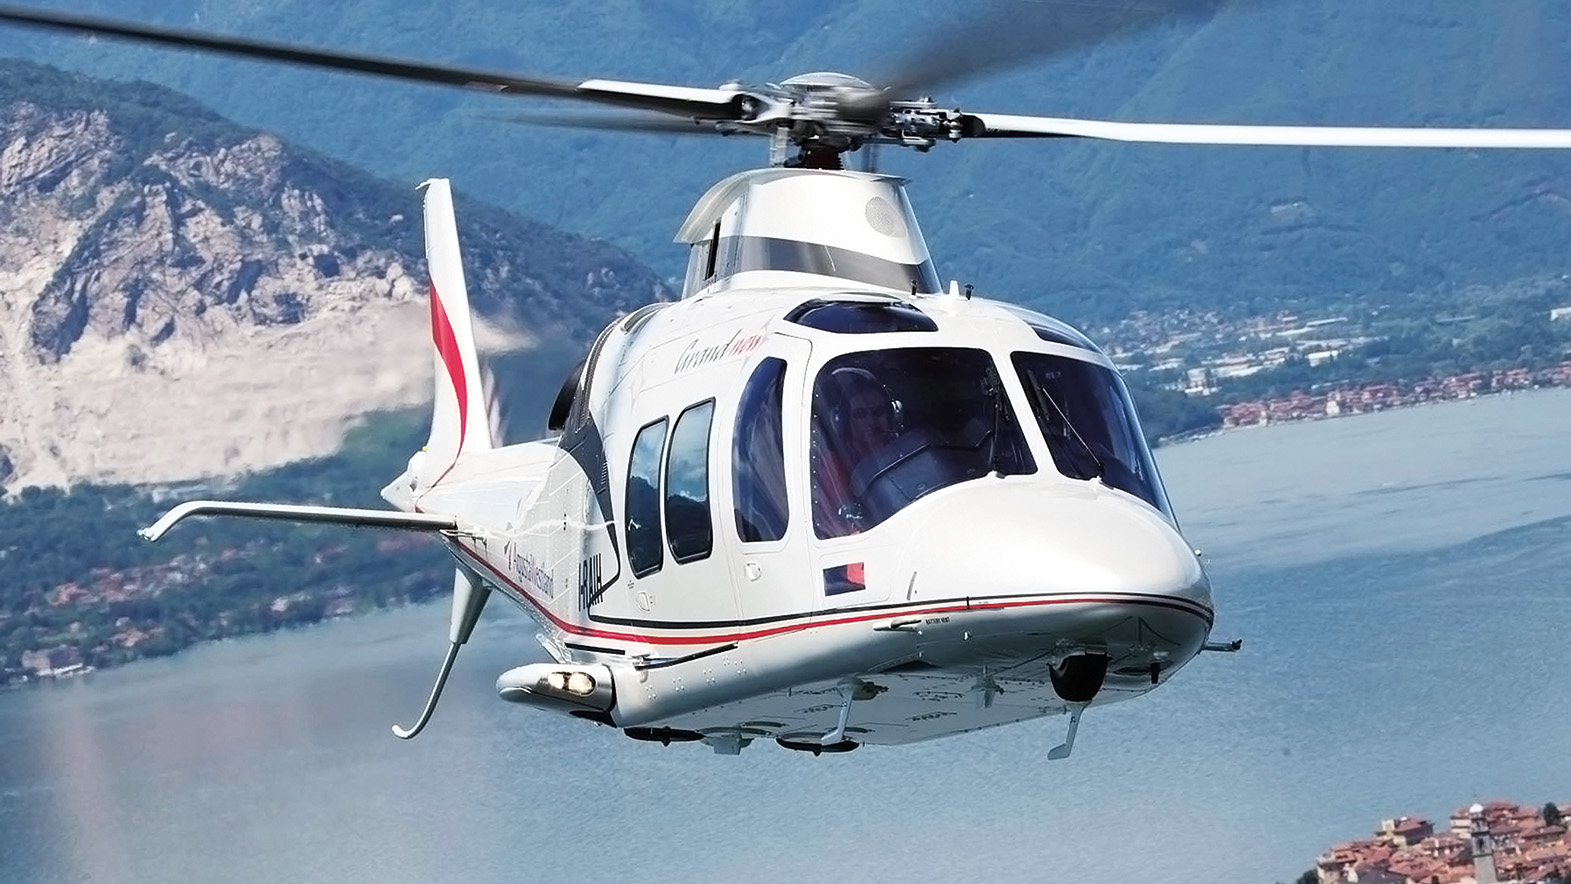 Agusta A109 Lyon to Val-d'Isere helicopter flights